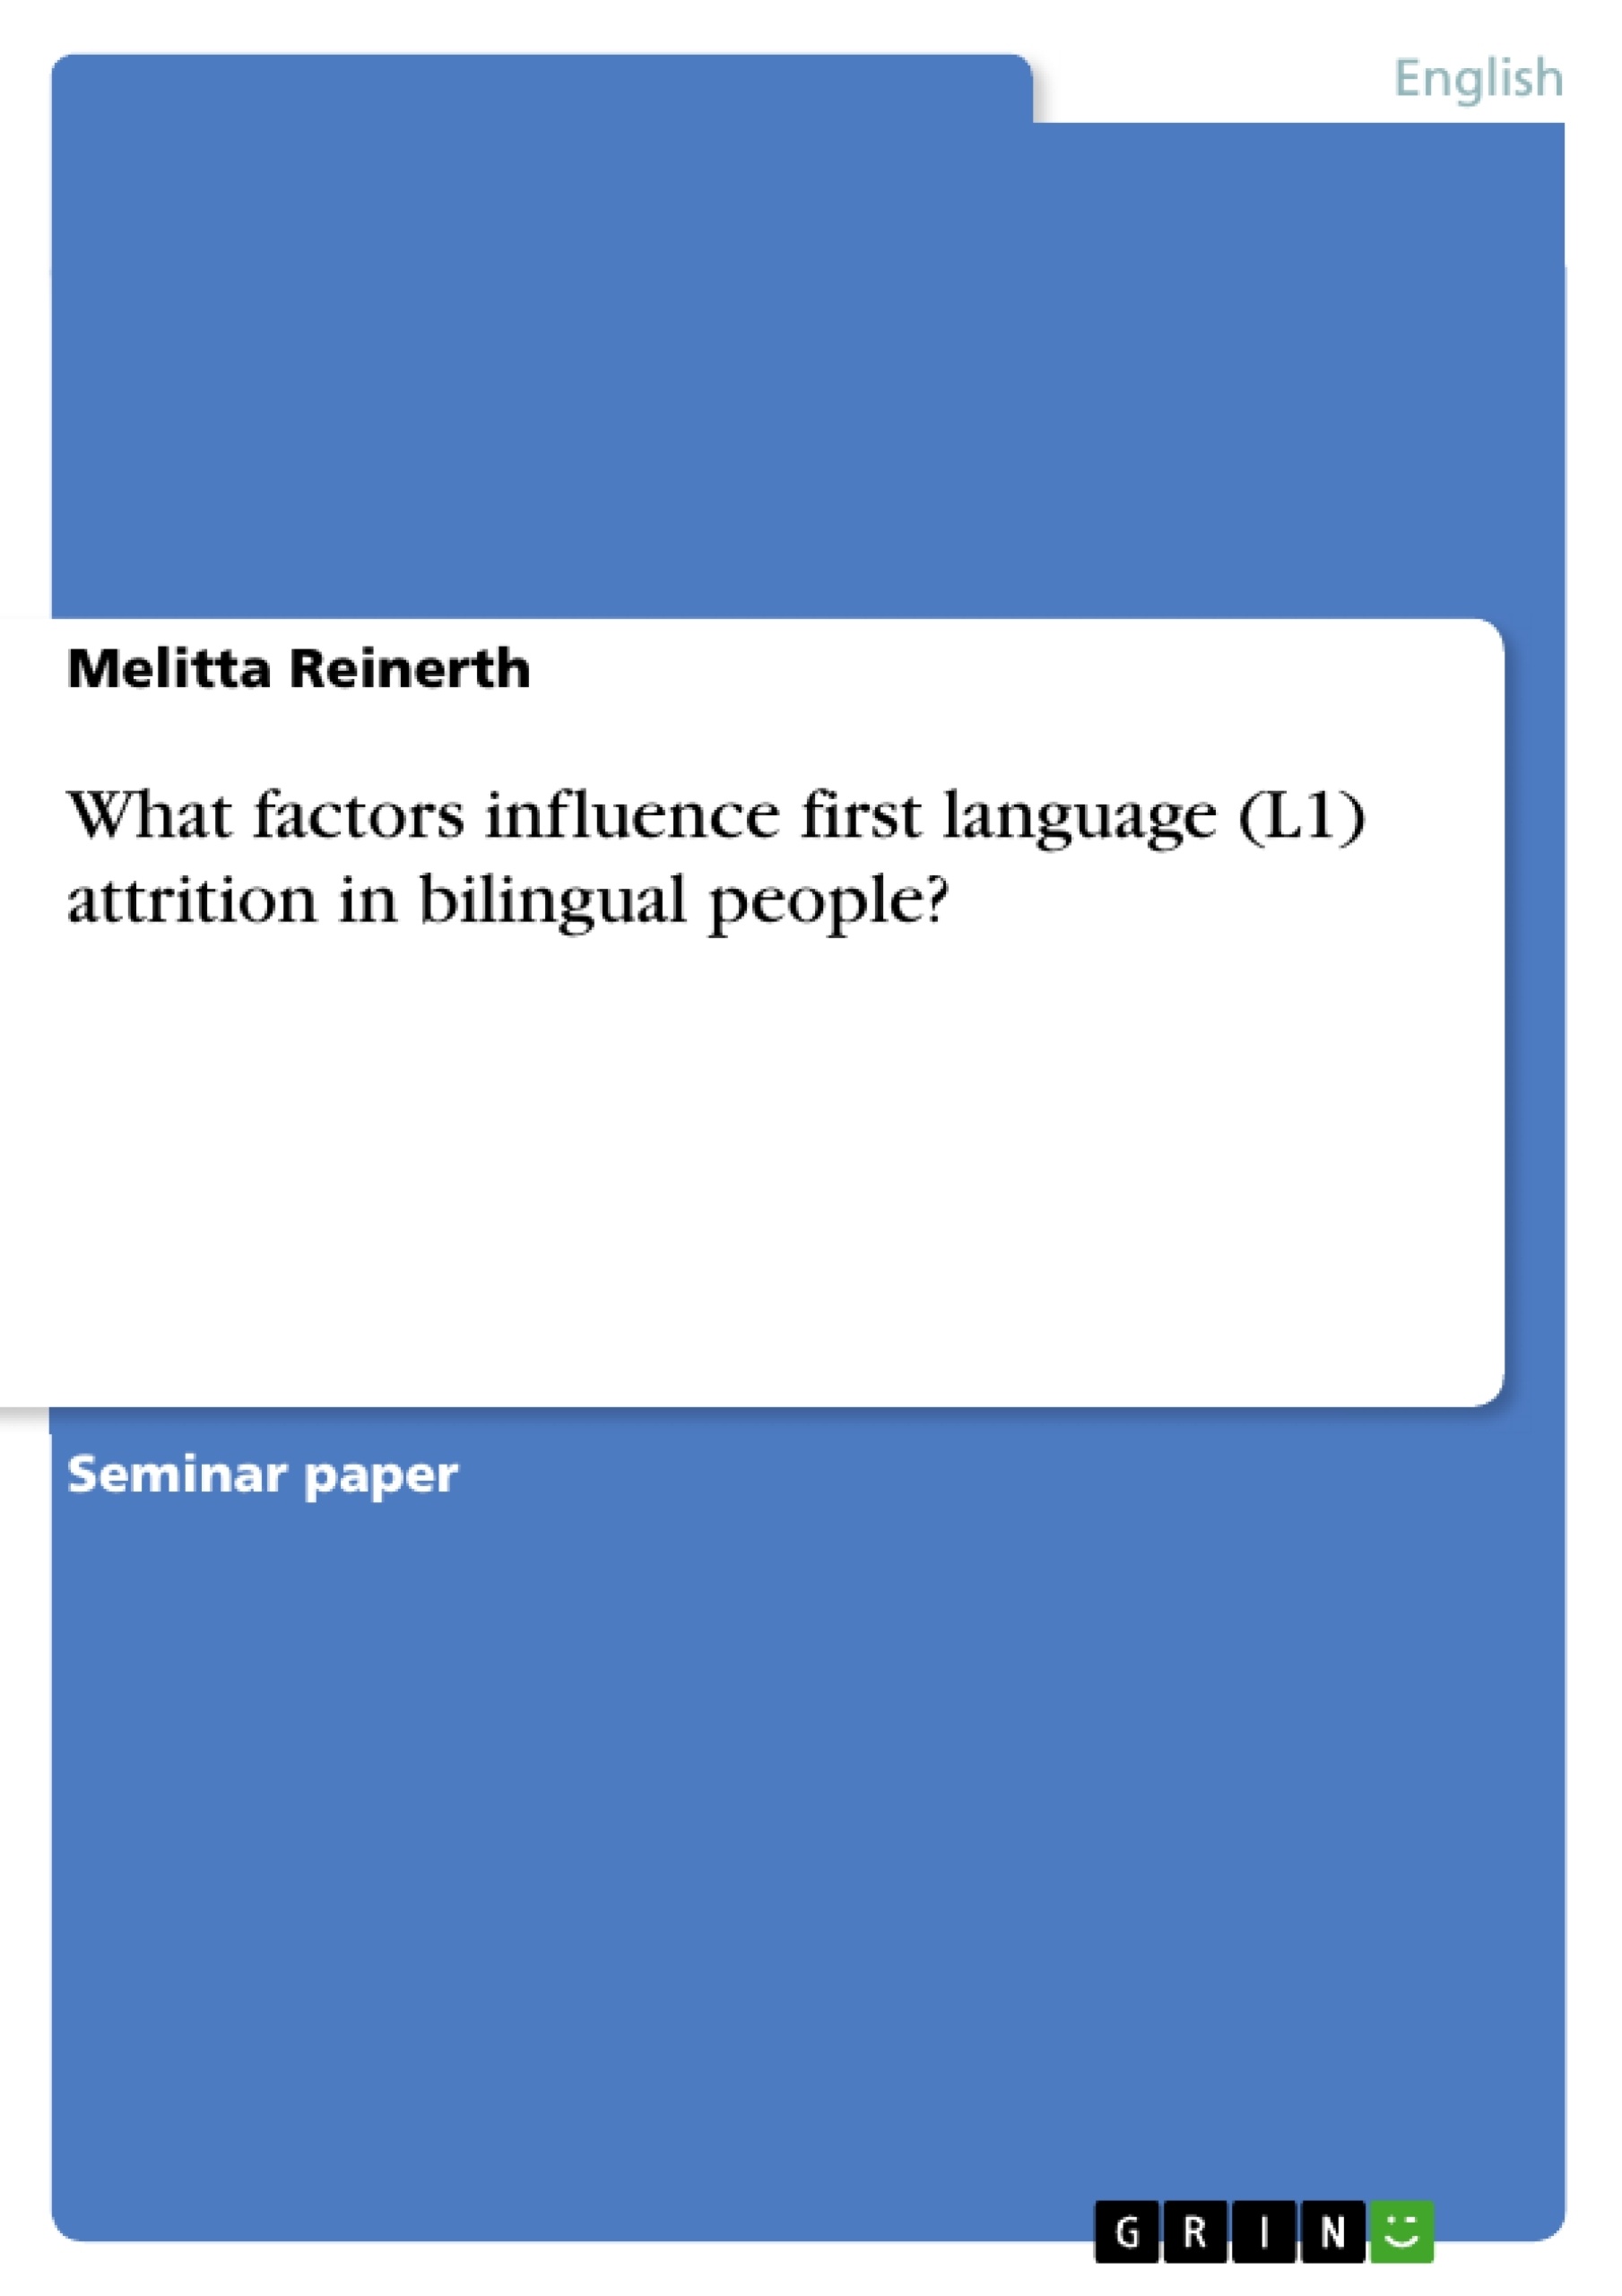 Title: What factors influence first language (L1) attrition in bilingual people?